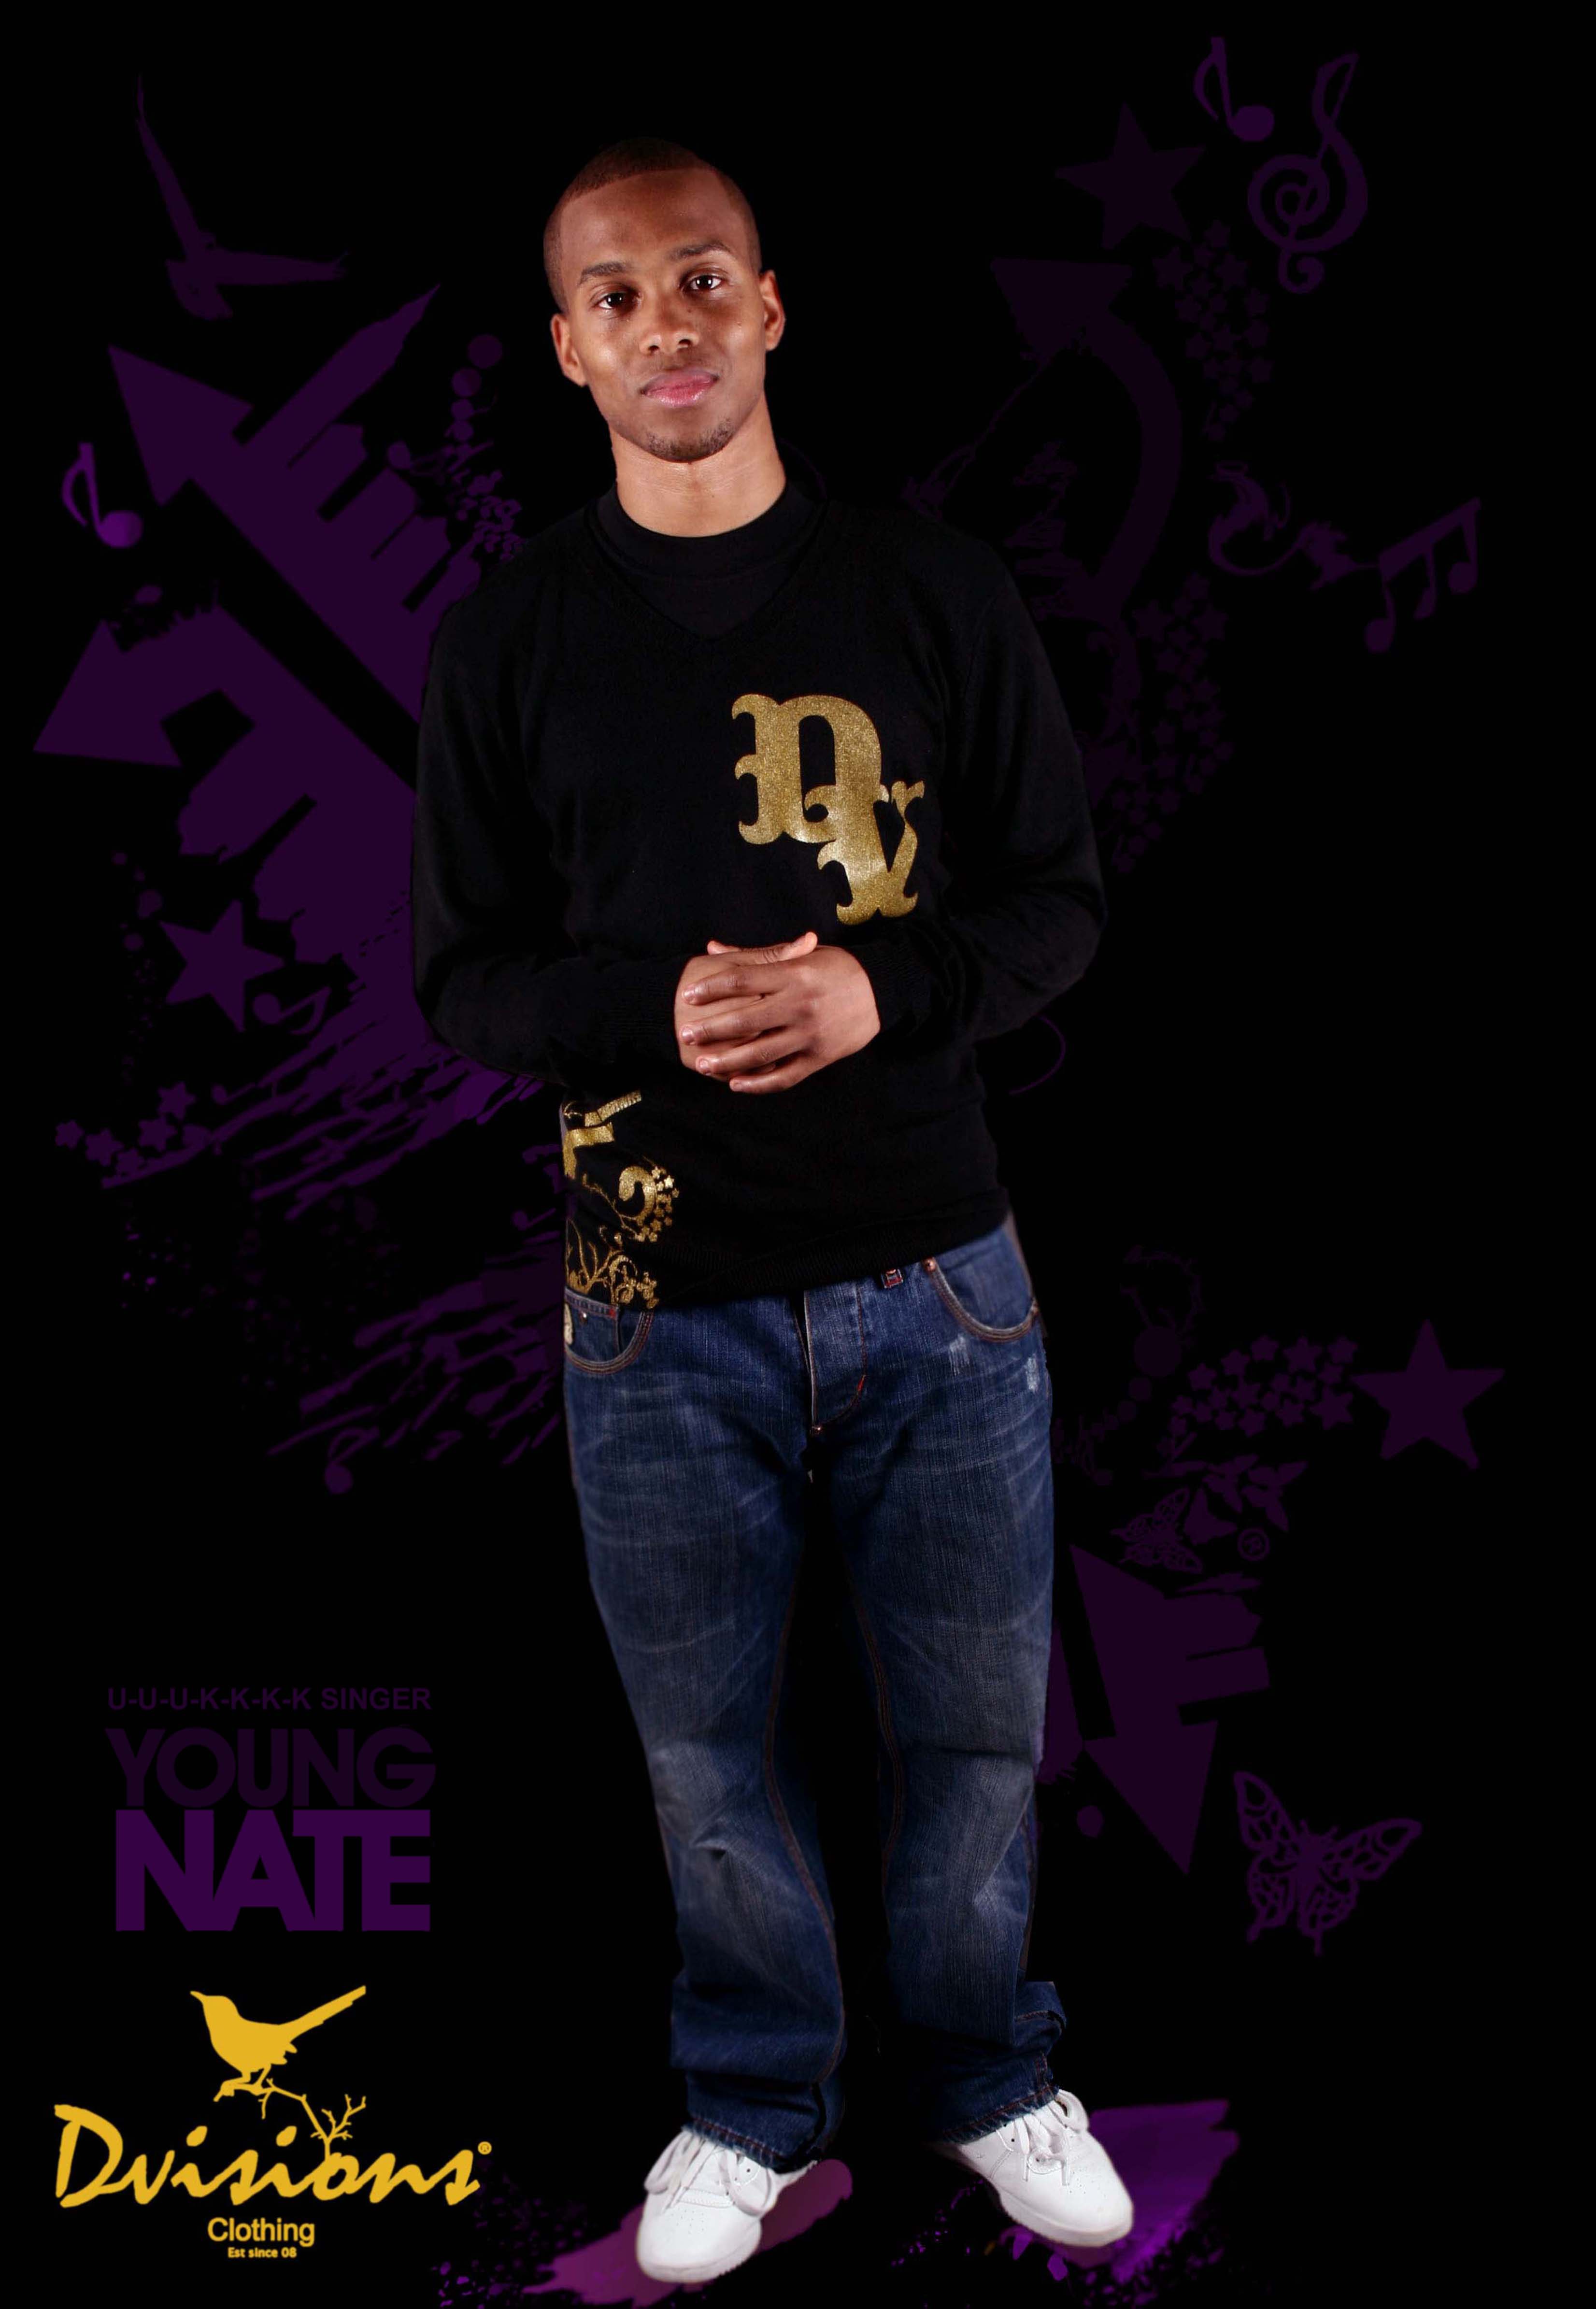 Young Nate